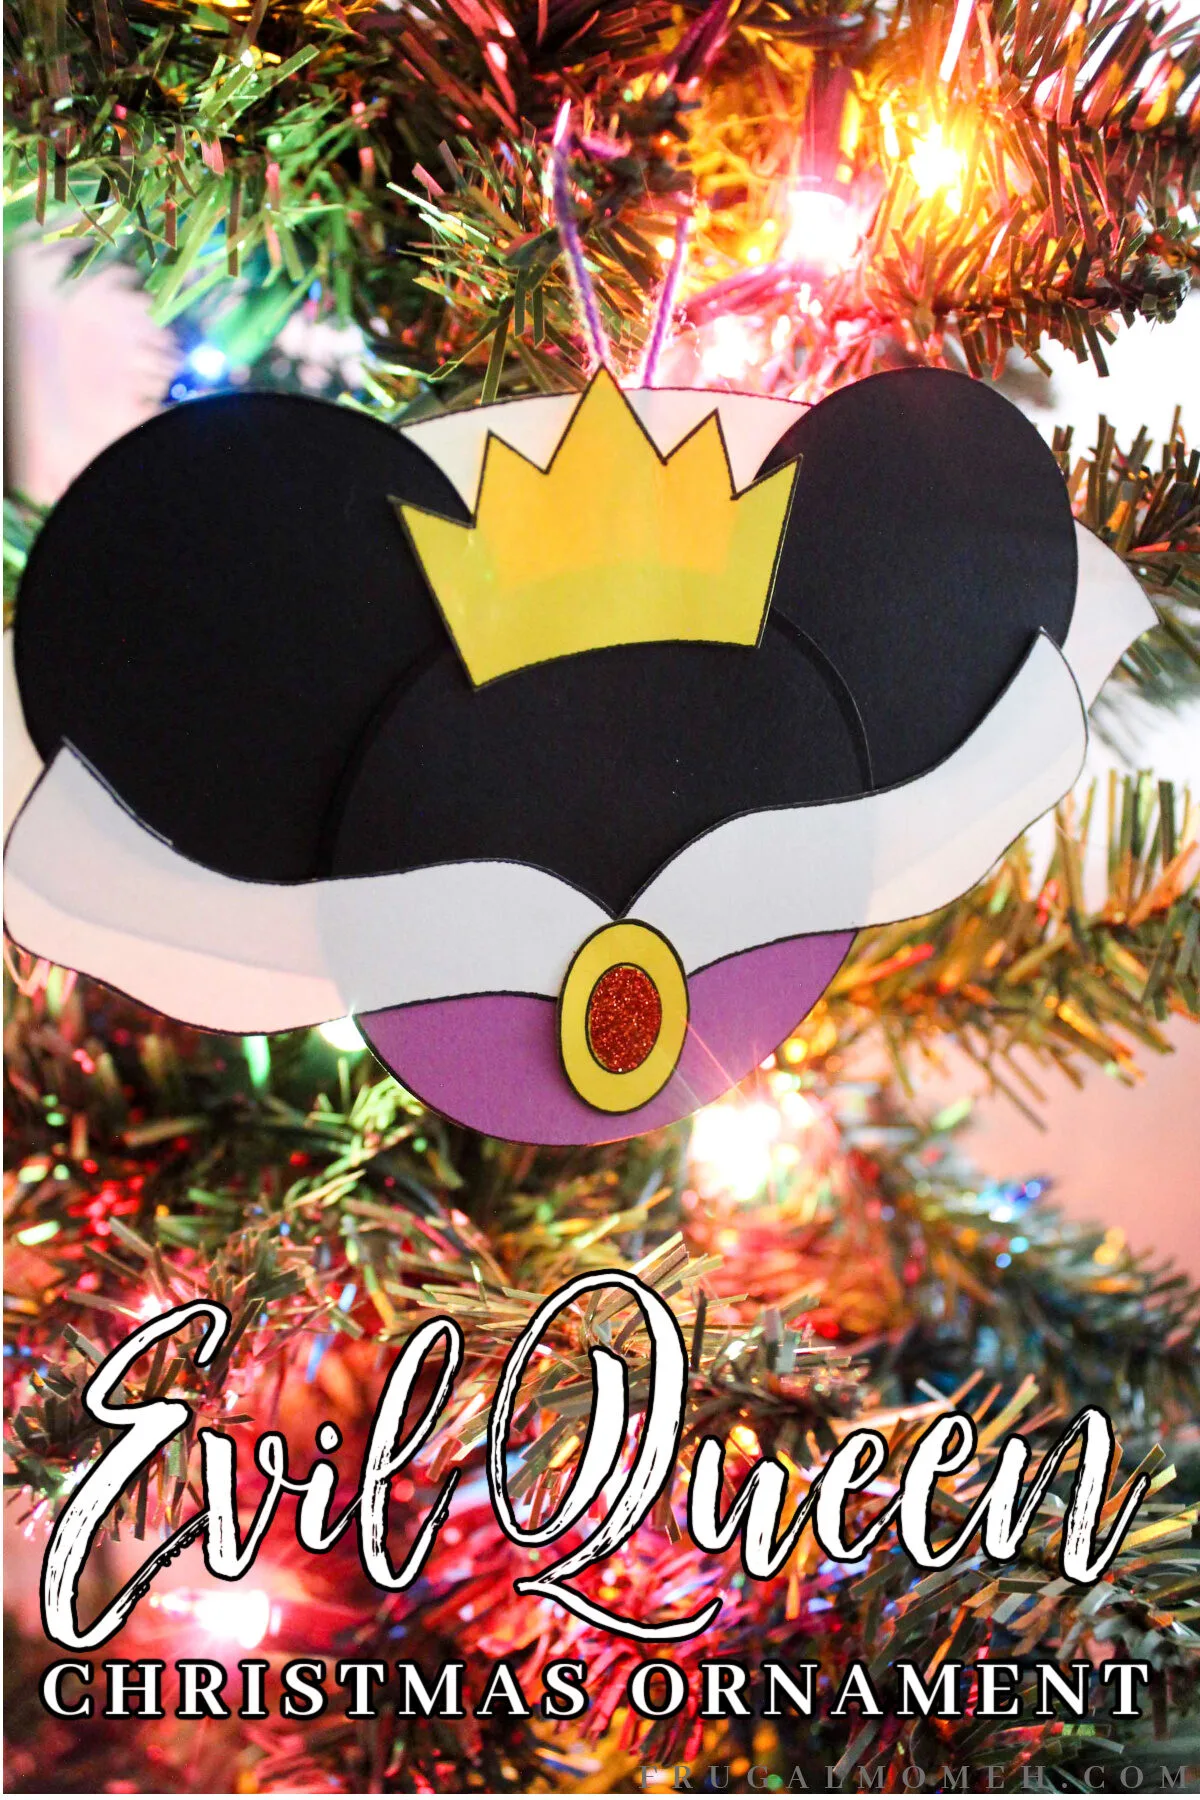 Make a quick & easy DIY Evil Queen Mickey Ears Ornament for your Christmas tree! Instructions and free printable template included.